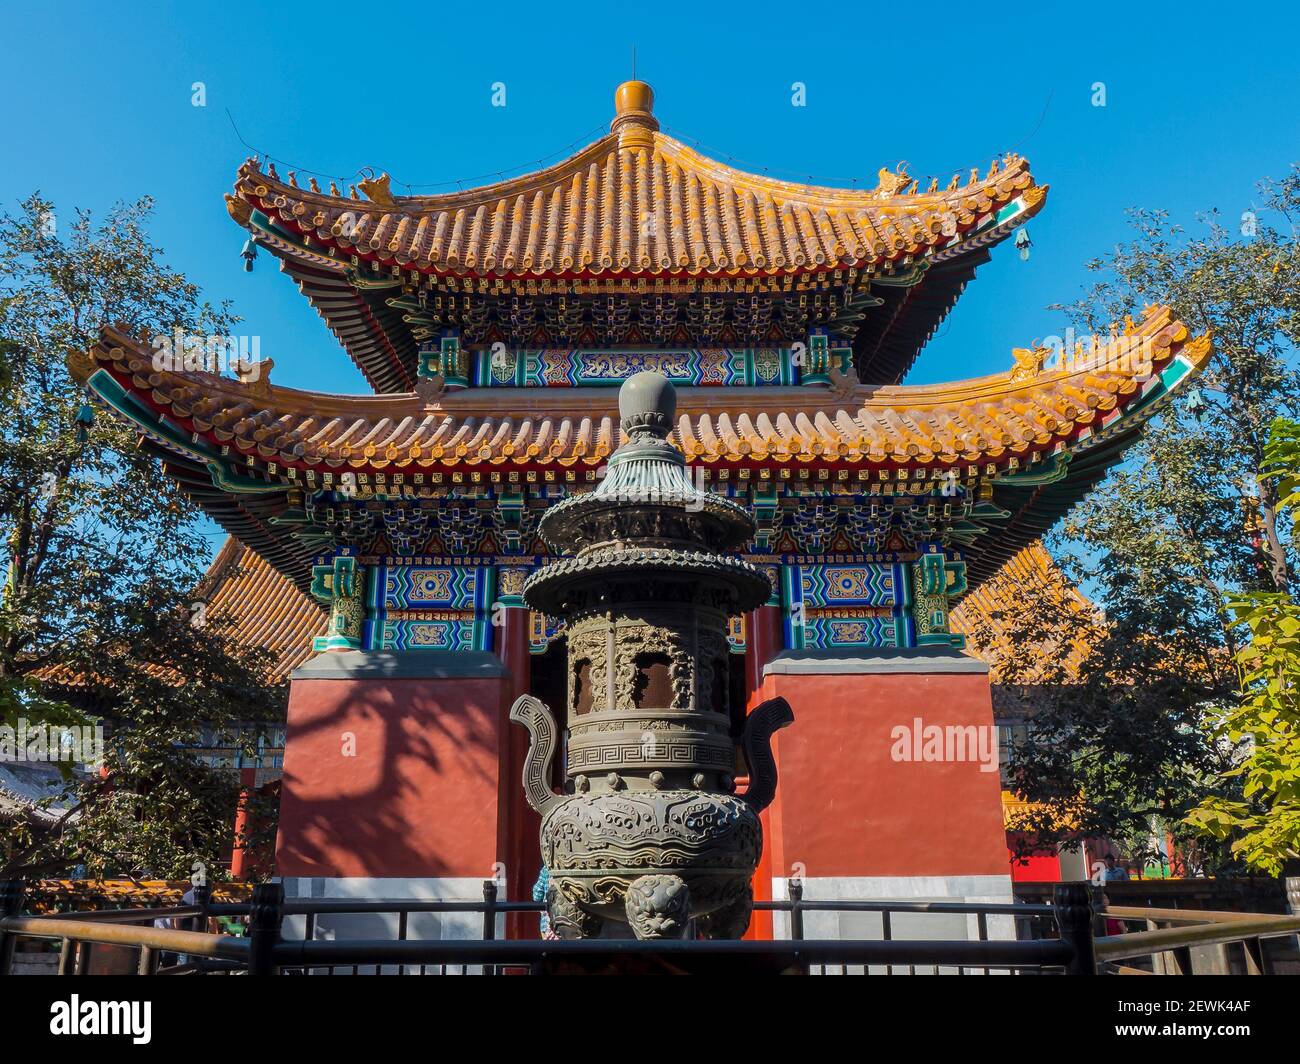 The Yonghe Temple, also known as the ''Palace of Peace and Harmony Lama Temple'', the ''Yonghe Lamasery'', or - popularly - the ''Lama Temple'' is a Stock Photo